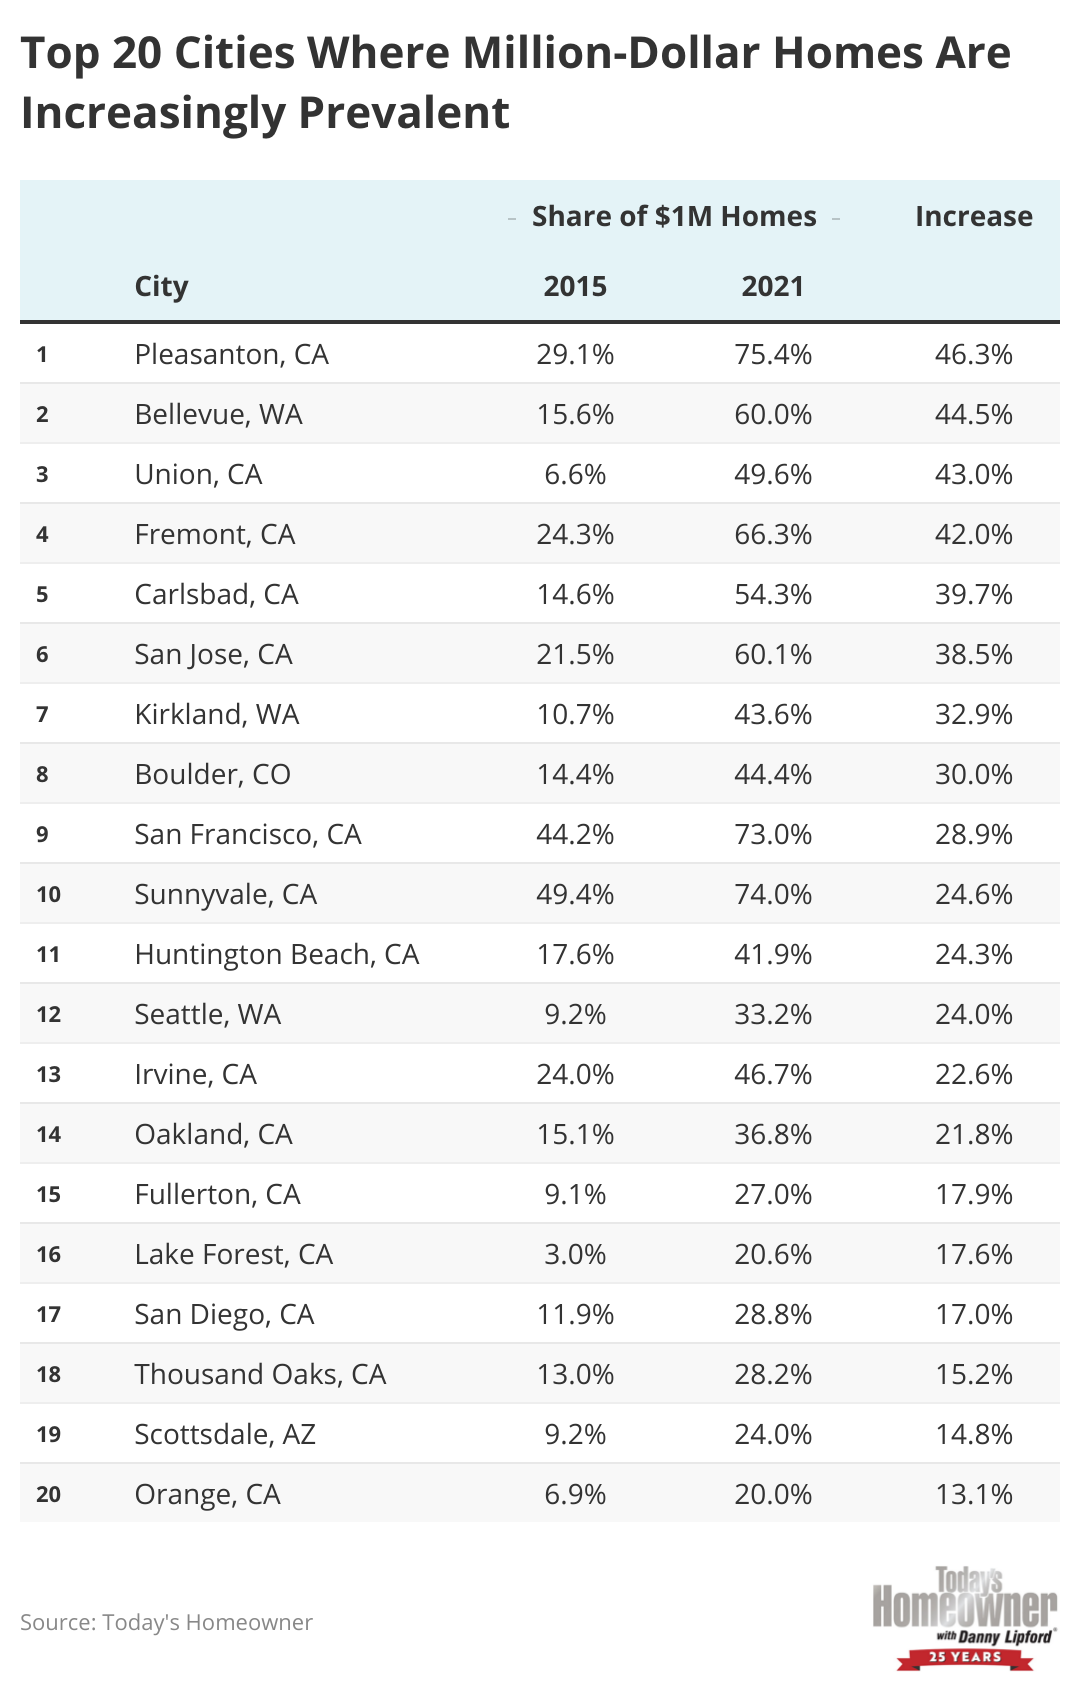 Table showing the top 20 cities where million-dollar homes are increasingly prevalent.